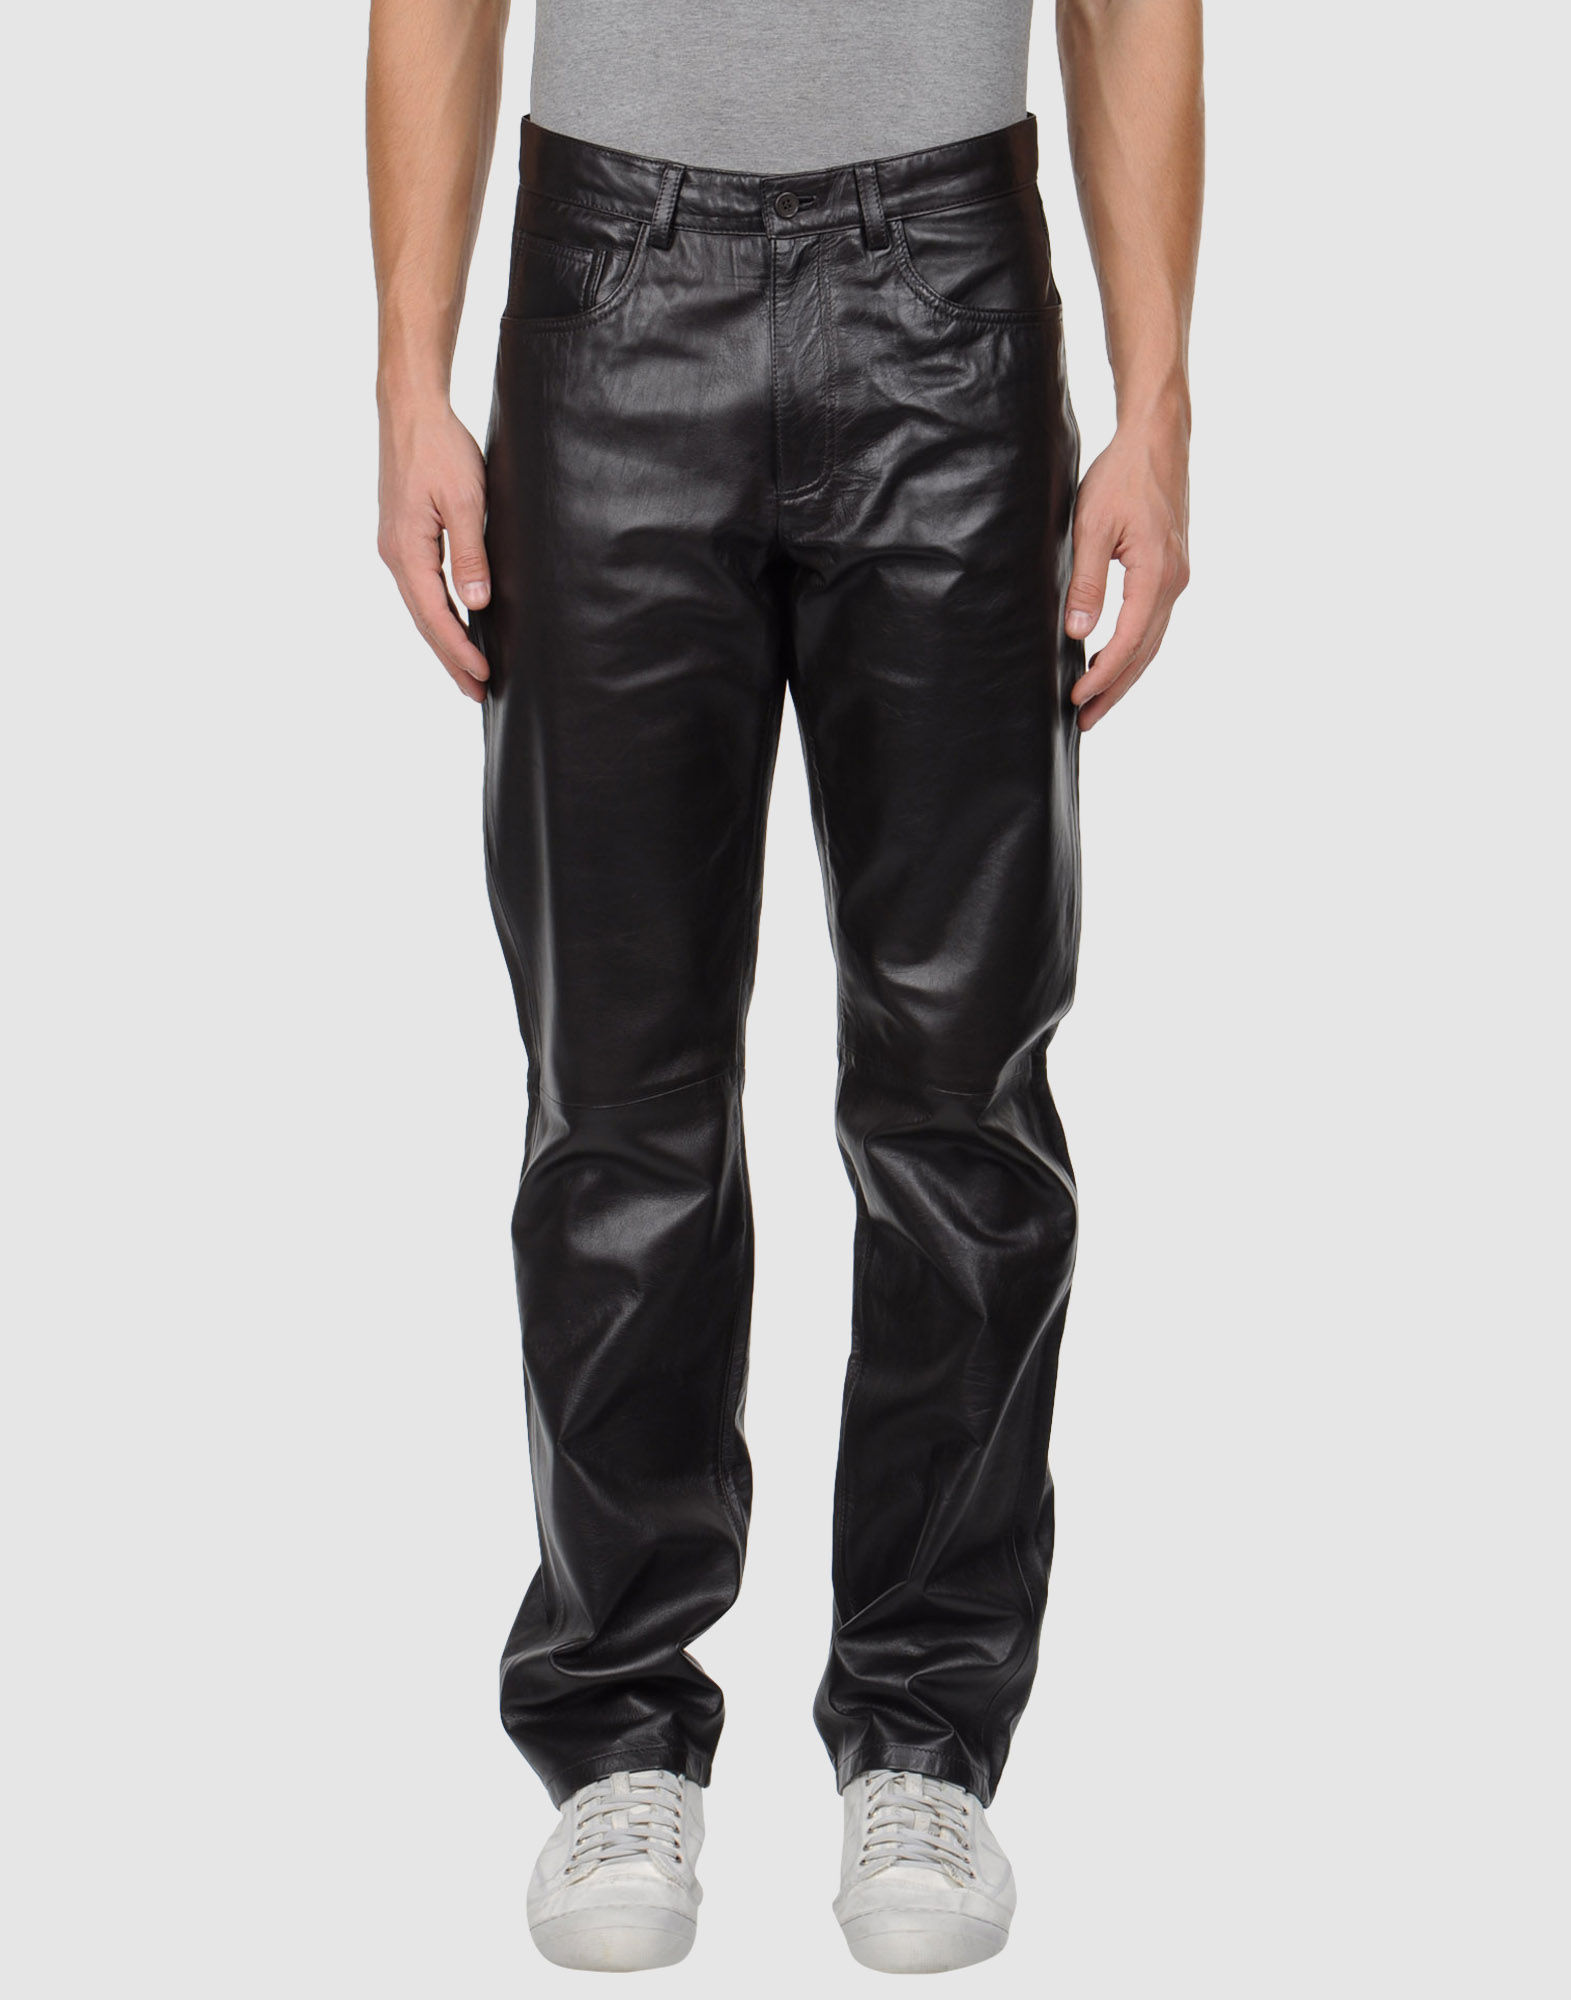 Dkny Dkny - Leather Pants in Brown for Men | Lyst